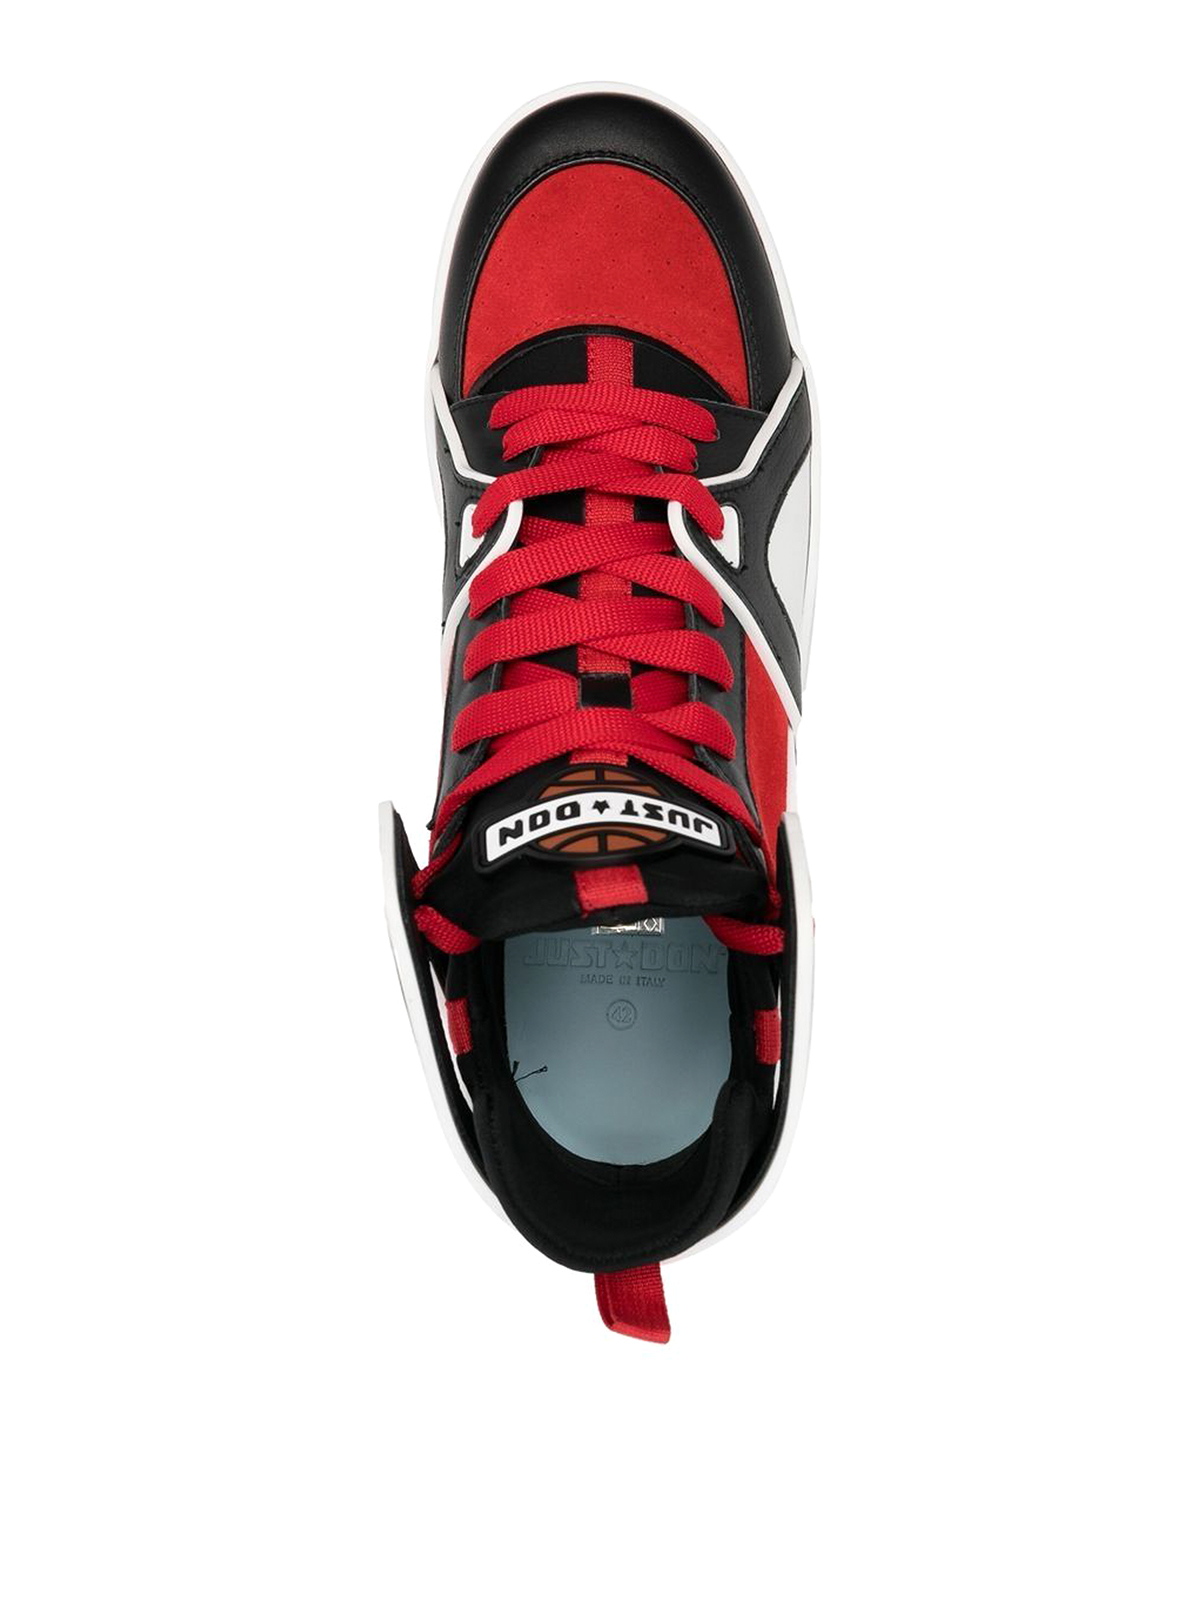 Shop Just Don Zapatillas - Basketball Courtside In Negro